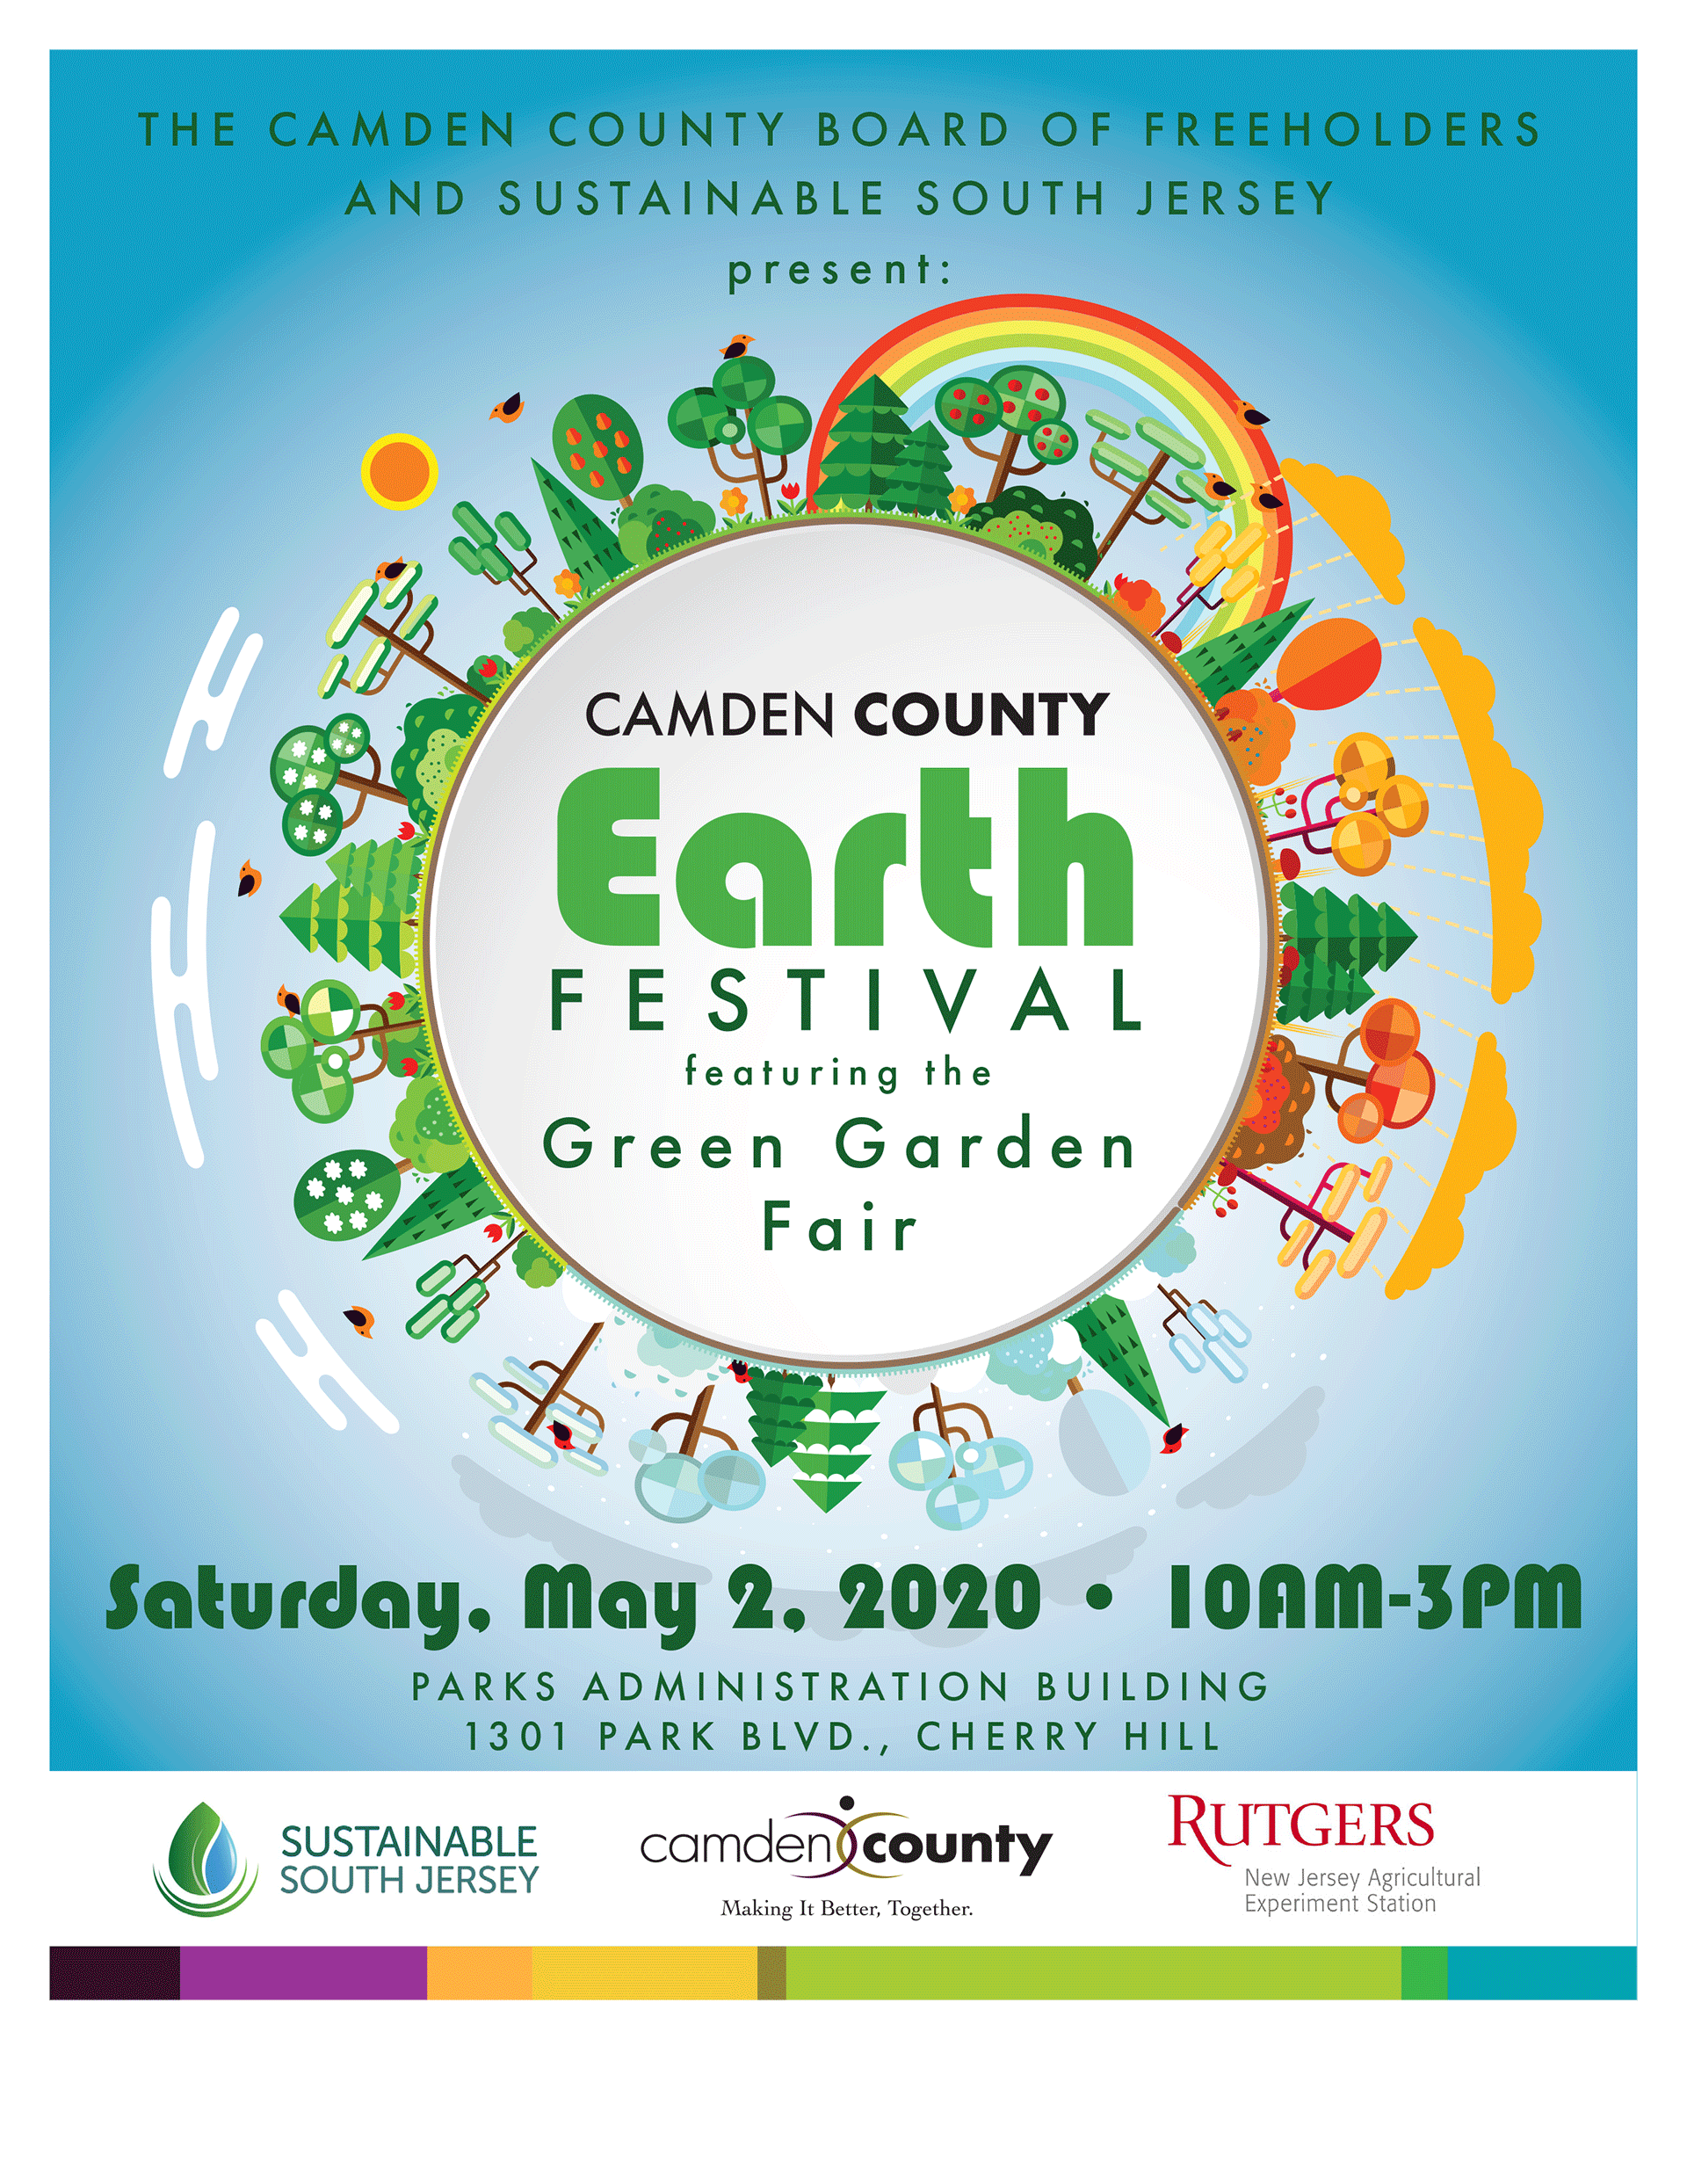 Sustainable-South-Jersey-Camden-County-2020-Earth-Festival